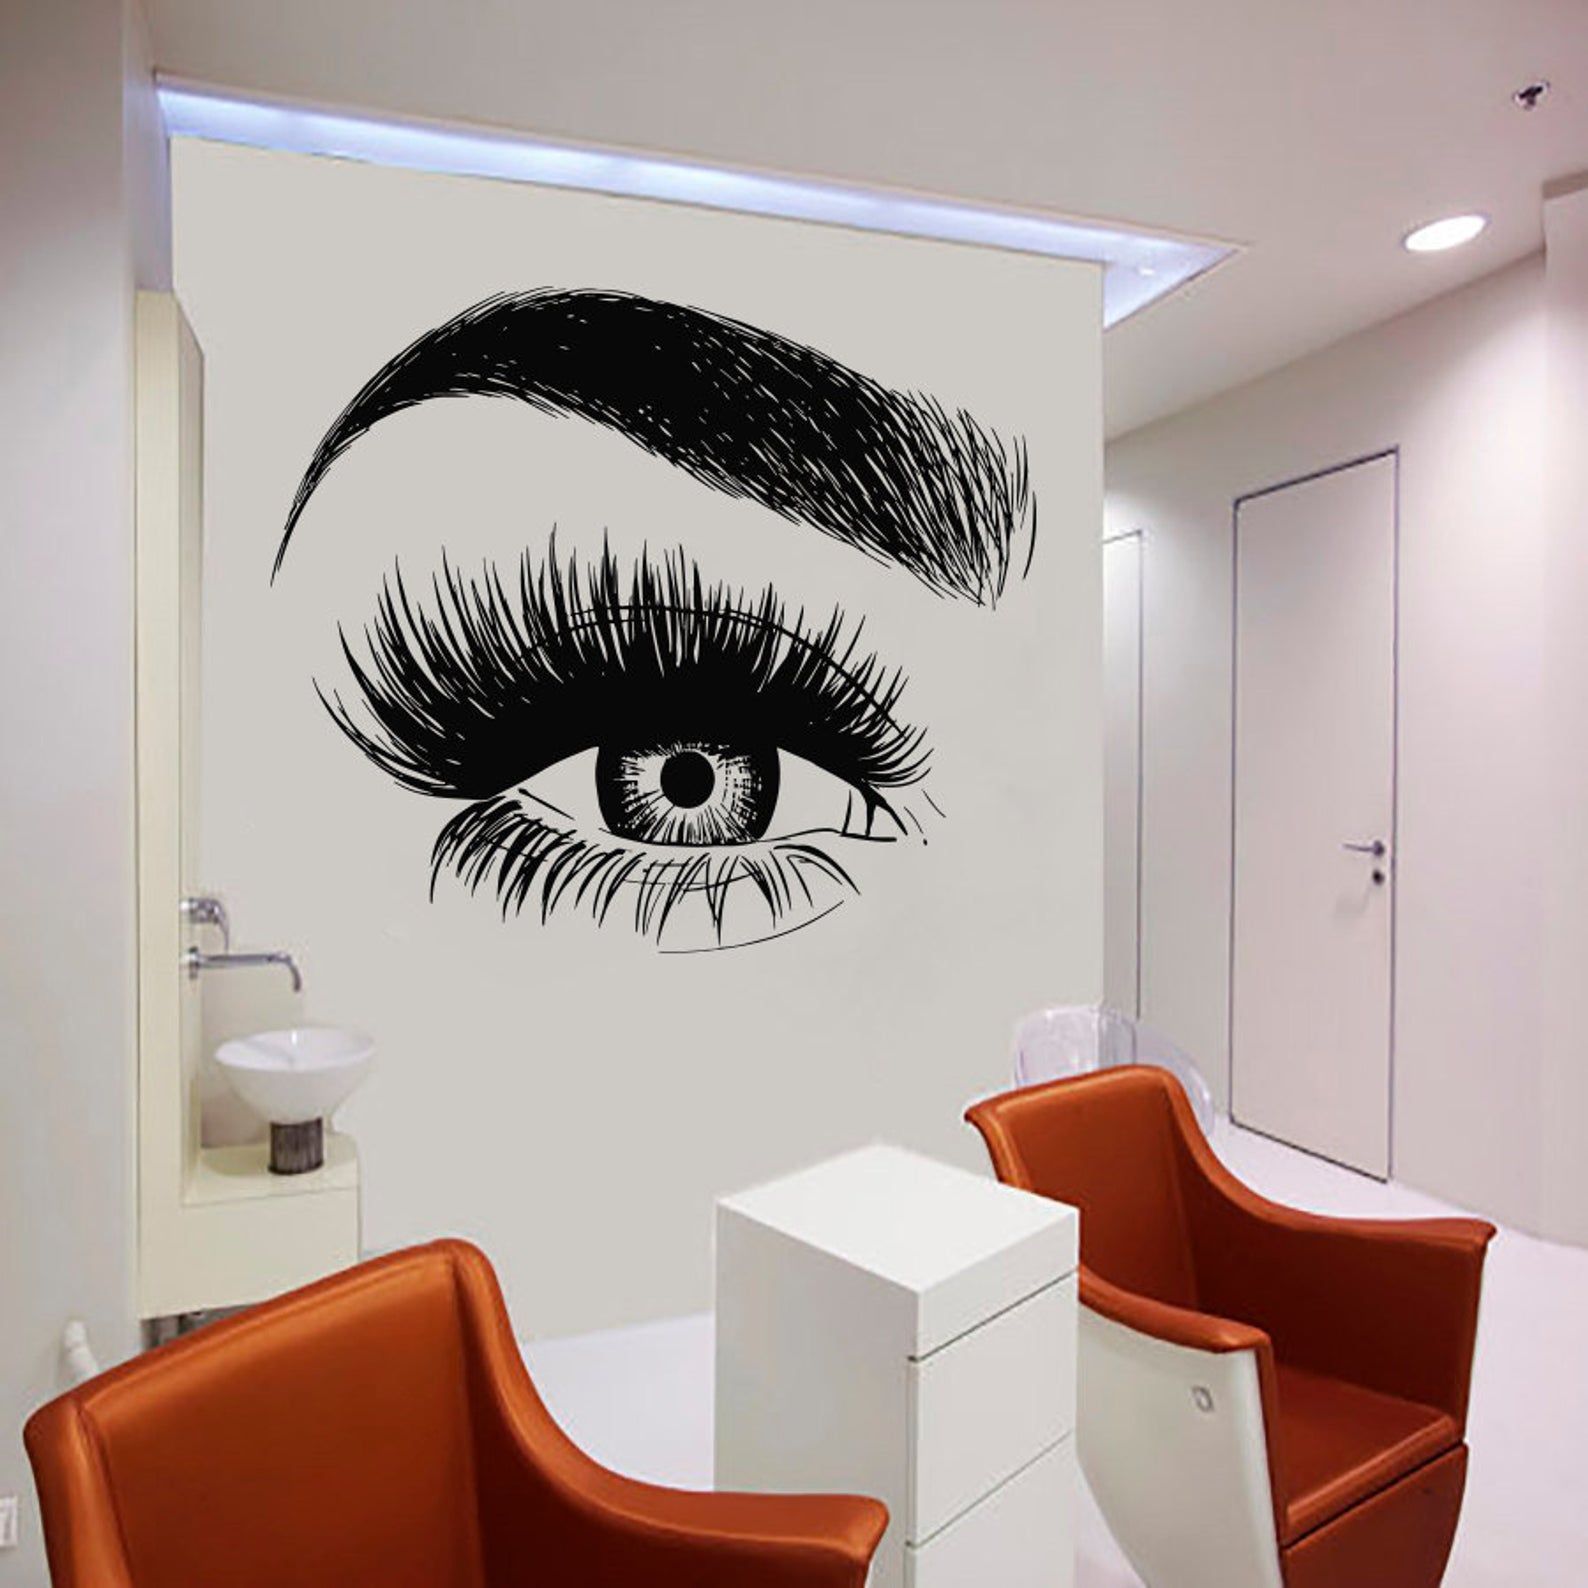 Wall Decal Window Sticker Beauty Salon Woman Face Eyelashes Lashes Eyebrows Brows t43 - Wall Decal Window Sticker Beauty Salon Woman Face Eyelashes Lashes Eyebrows Brows t43 -   12 beauty Salon window ideas